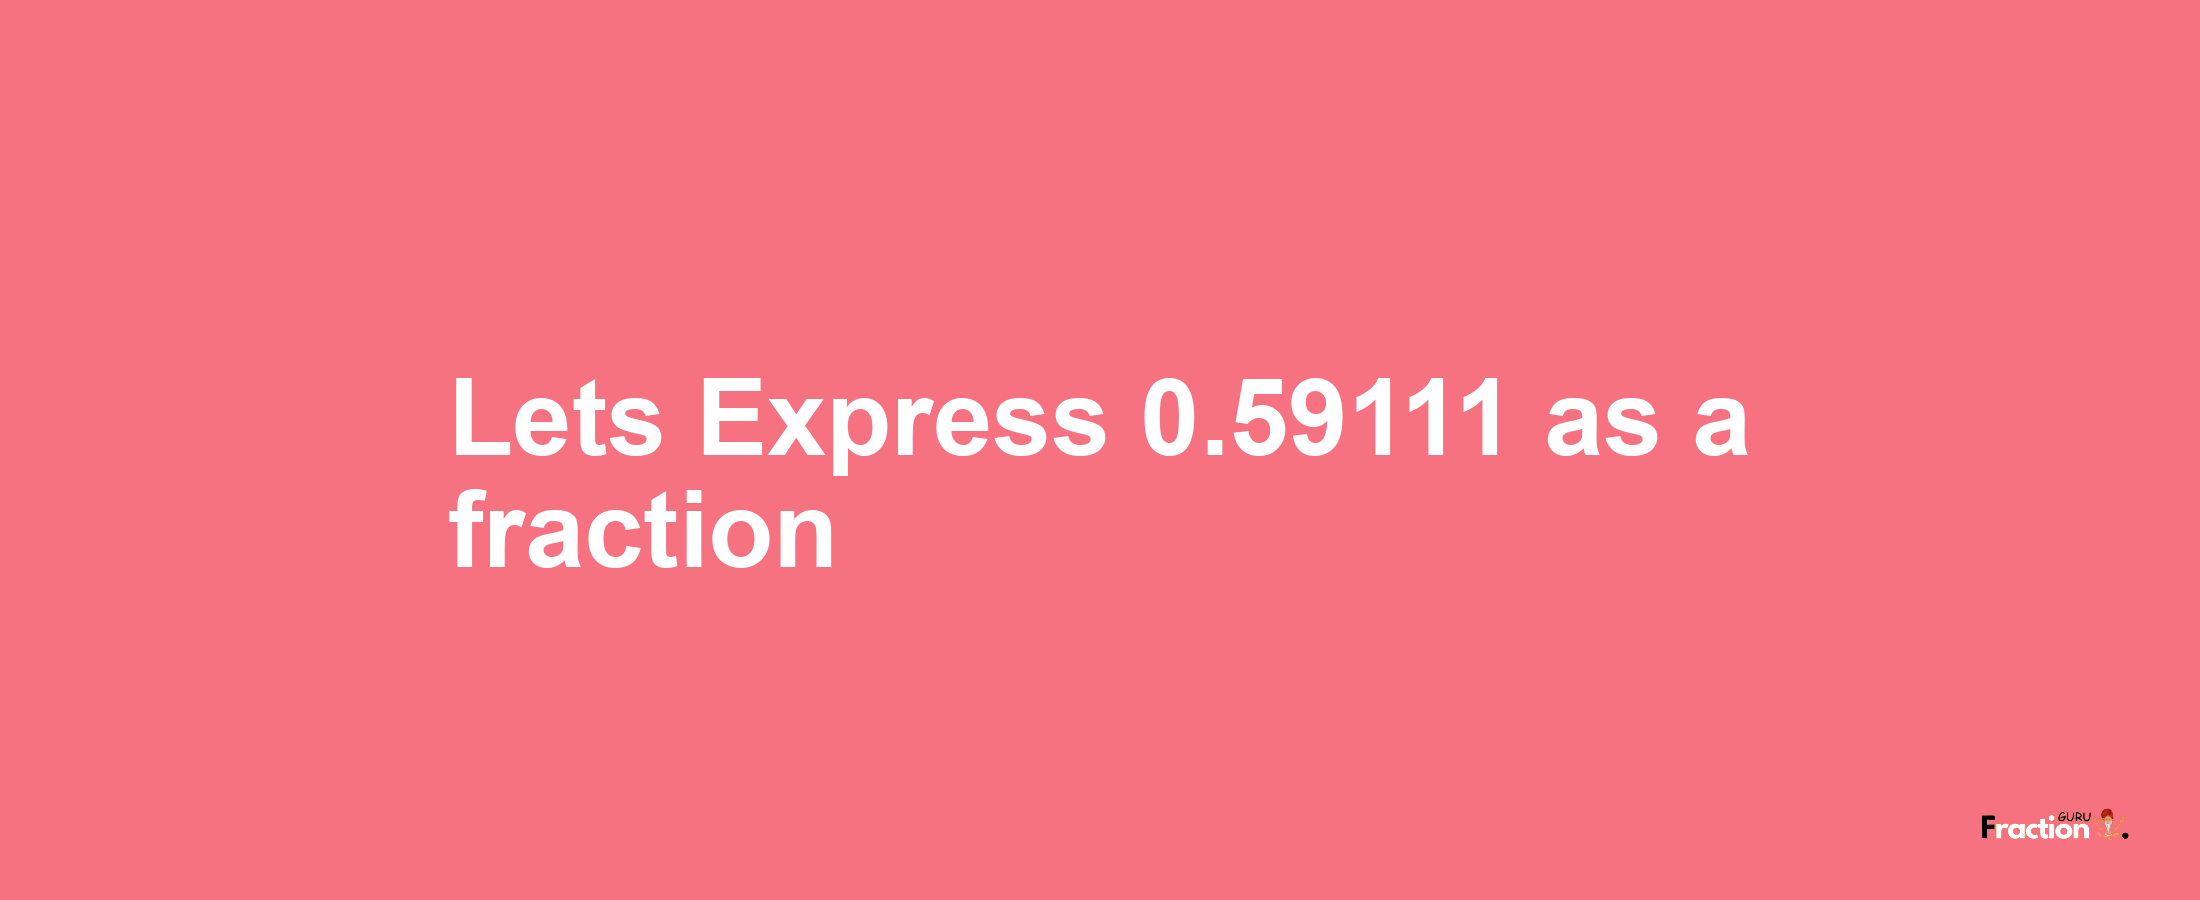 Lets Express 0.59111 as afraction